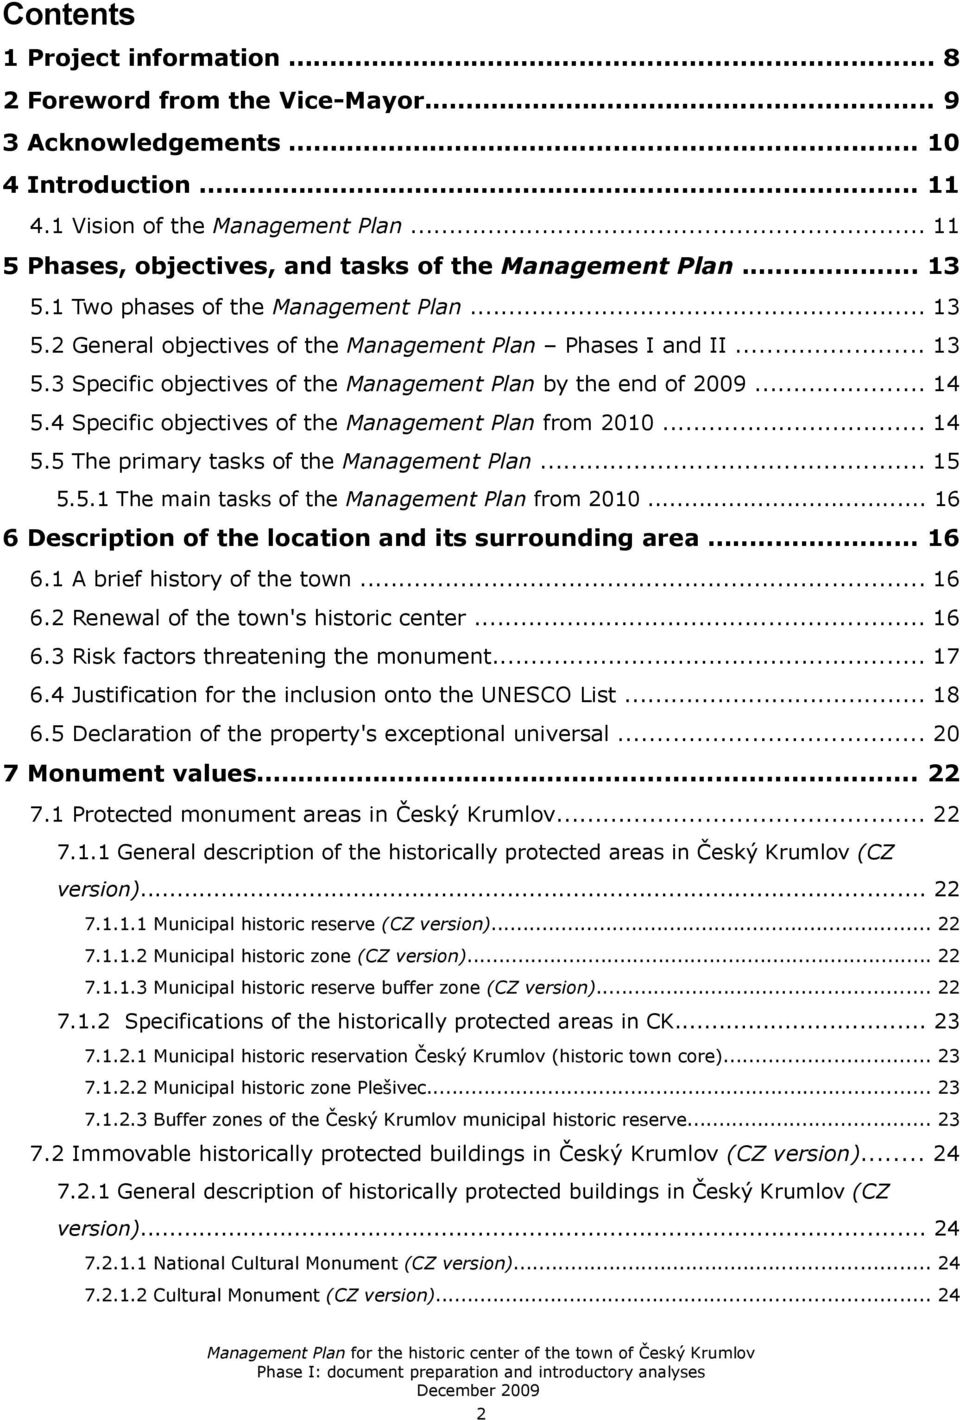 .. 14 5.4 Specific objectives of the Management Plan from 2010... 14 5.5 The primary tasks of the Management Plan... 15 5.5.1 The main tasks of the Management Plan from 2010.